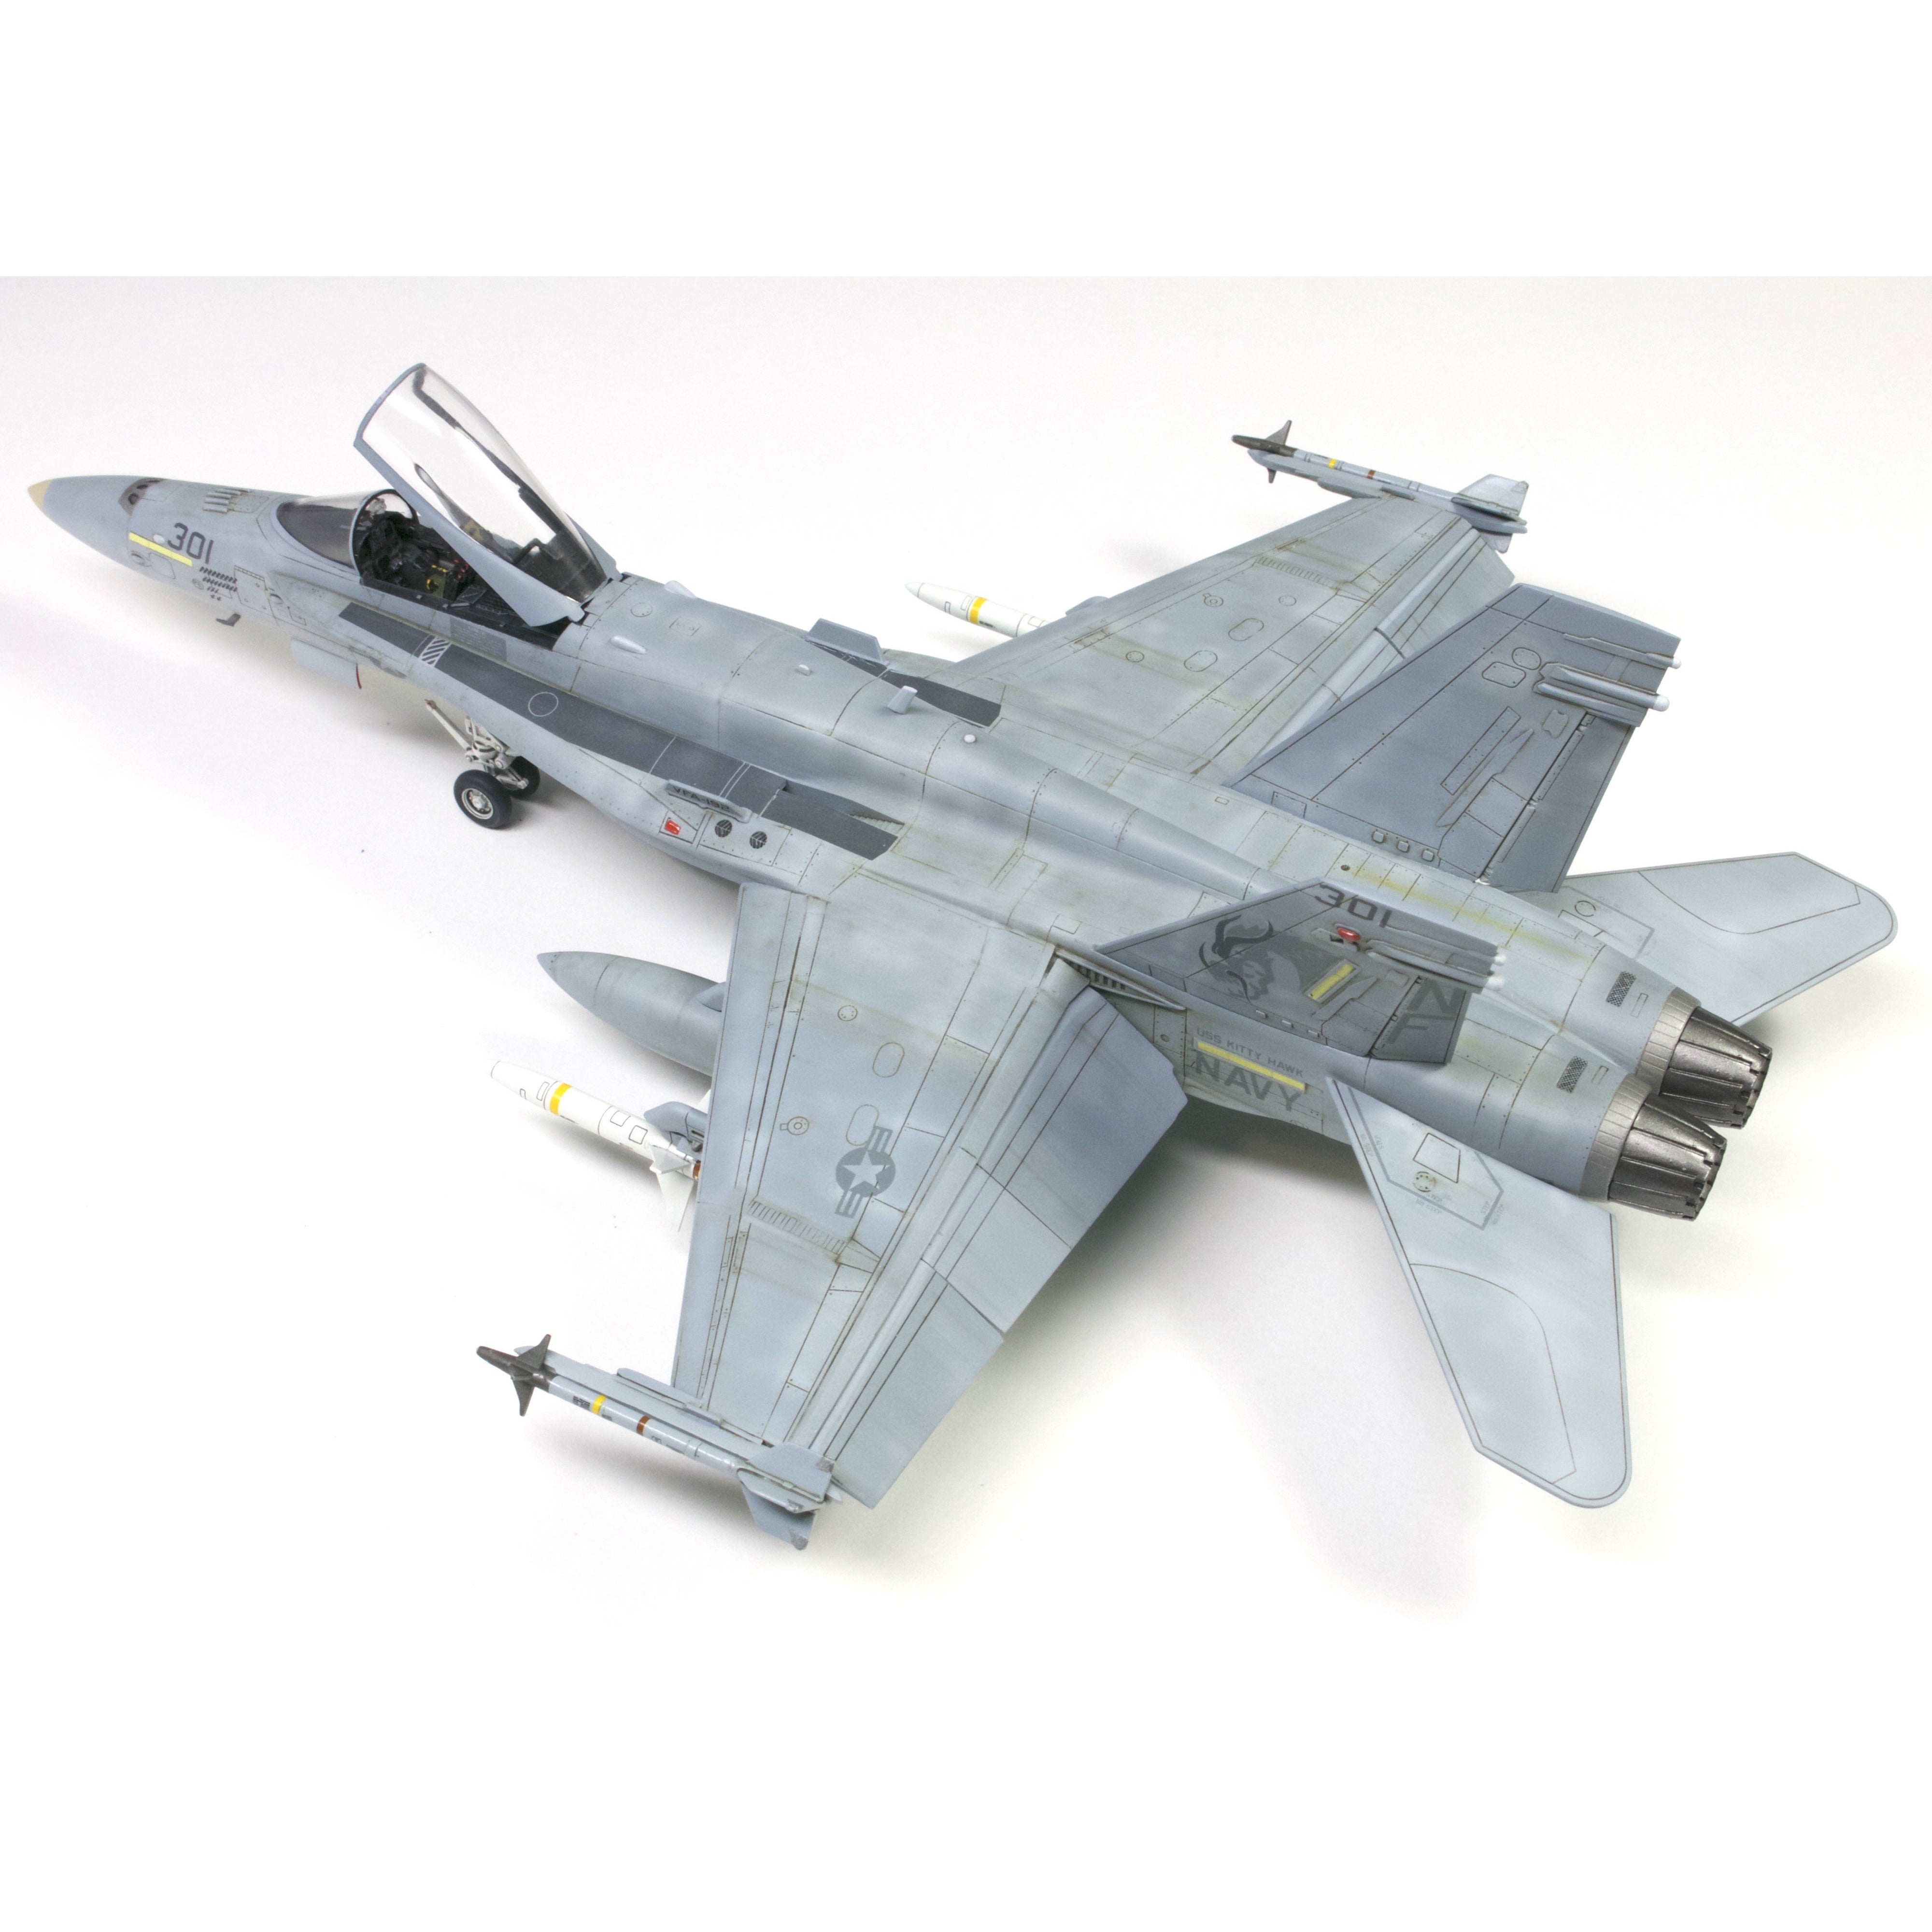 F/A-18C Hornet 1/72 by Hasegawa